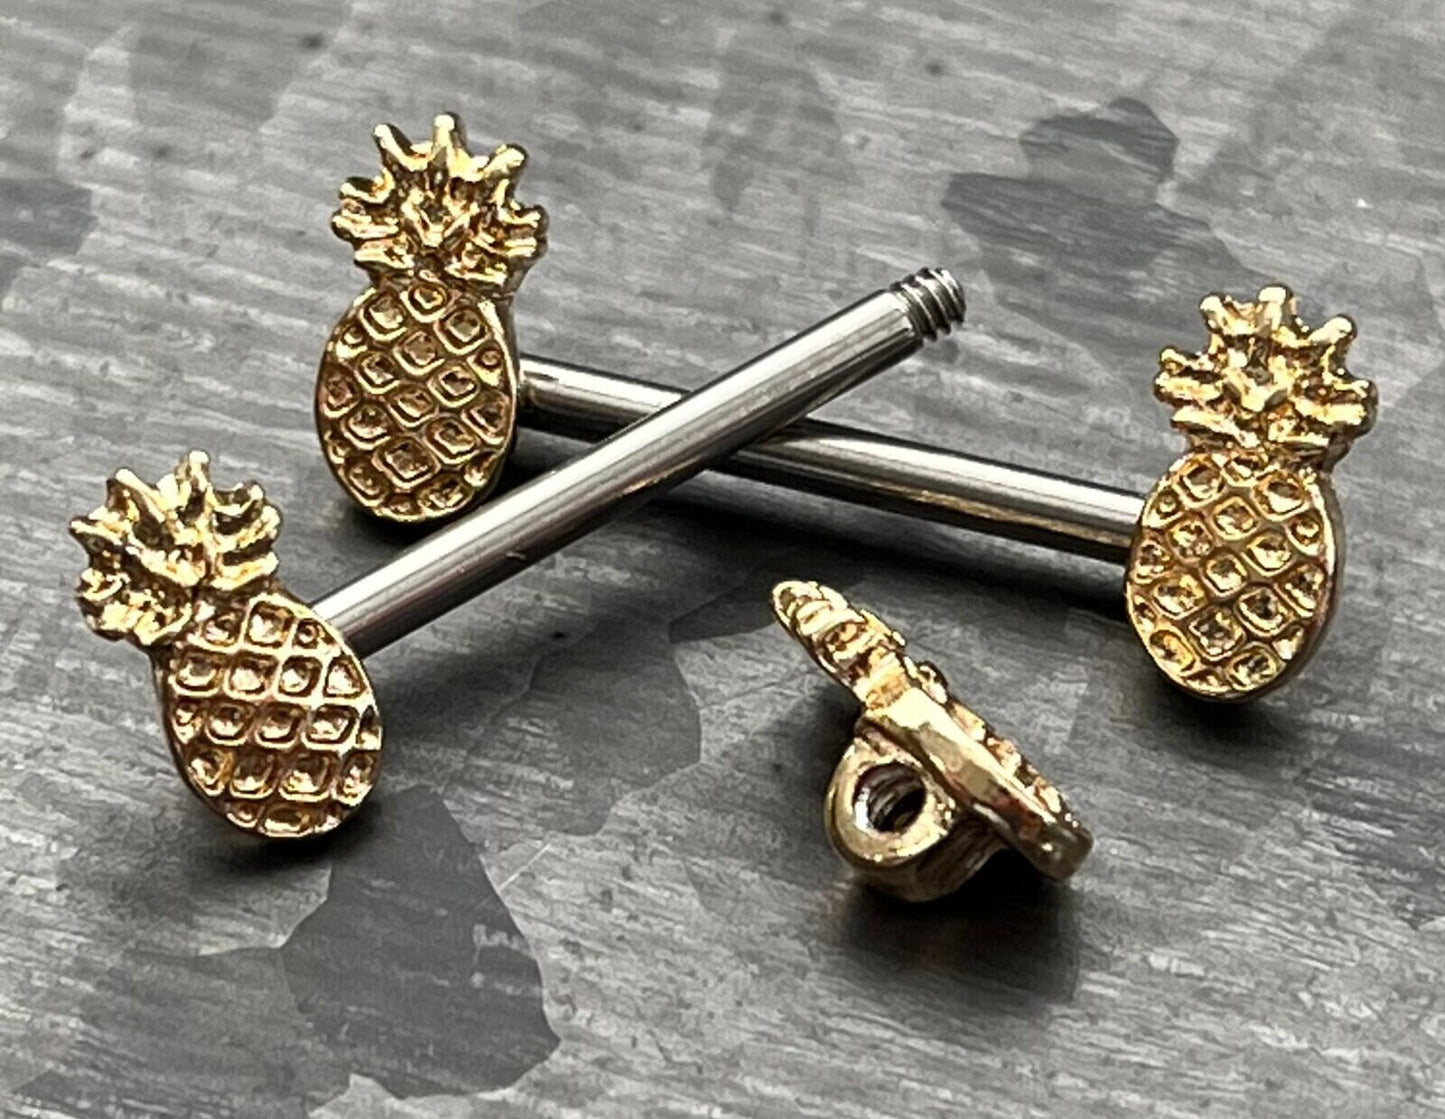 PAIR of Beautiful Gold Pineapple Surgical Barbell Nipple Rings - 14g - 14mm (9/16") Wearable Length!